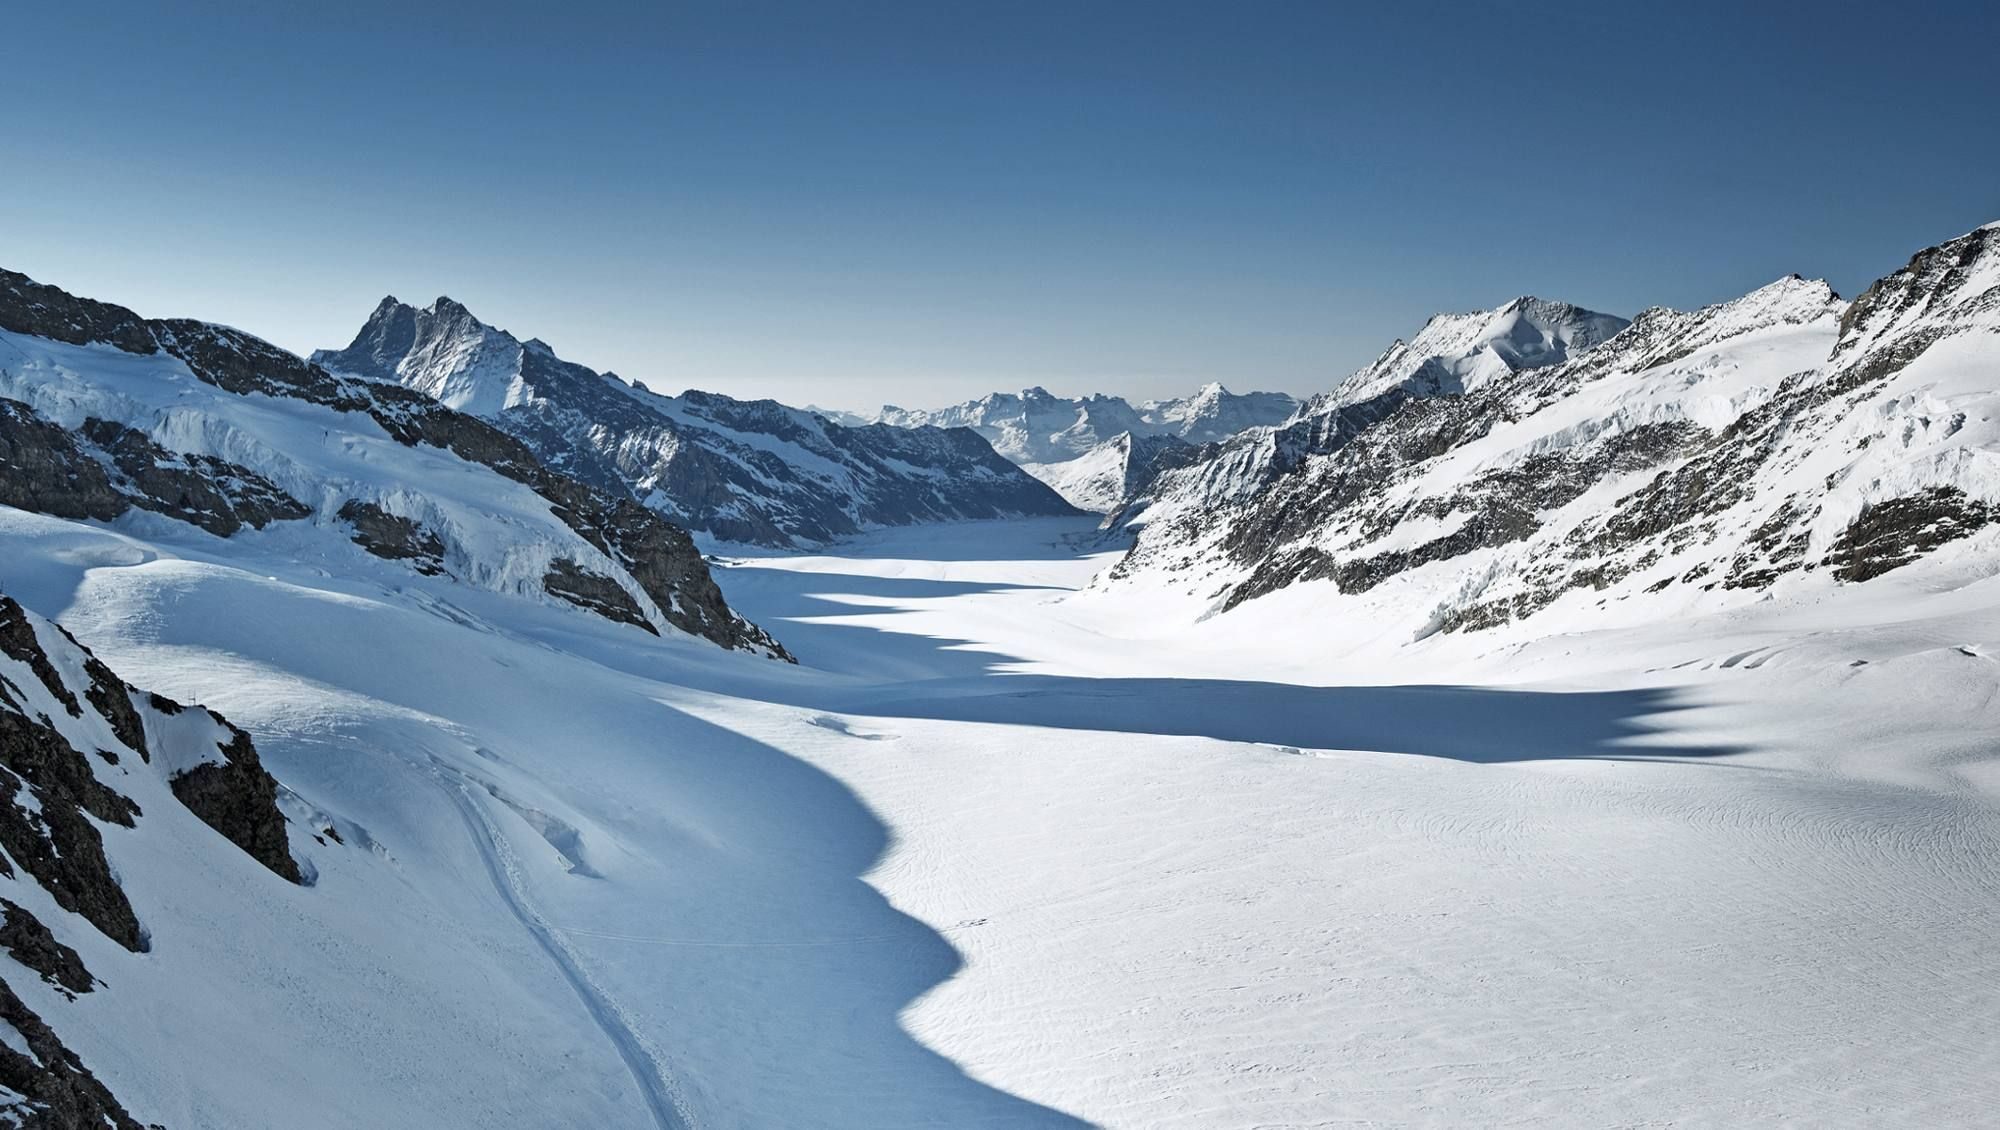 Jungfraujoch- Top of Europe. The new V-Cableway will bring you to your destination up to 47 minutes faster.